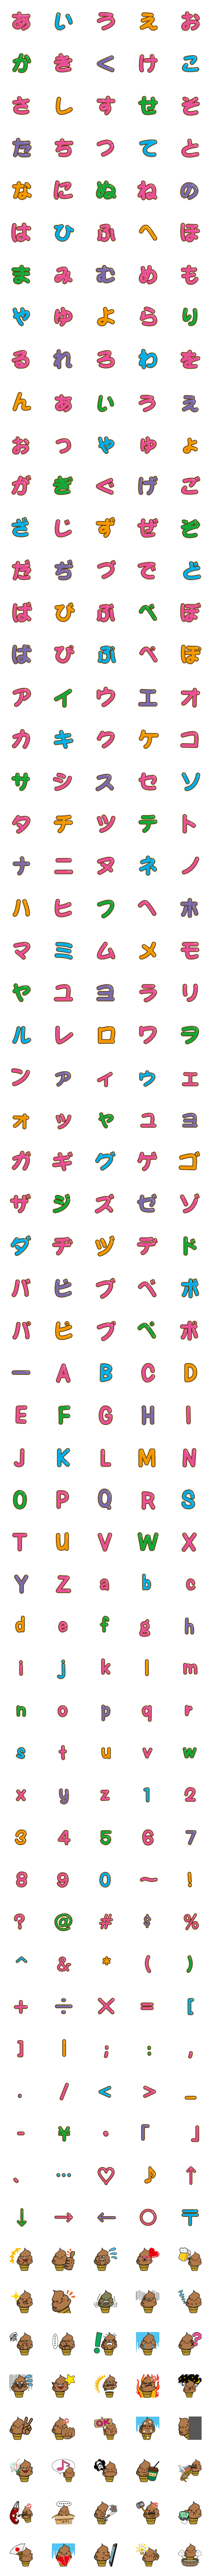 [LINE絵文字]チョコレートソフトクリームの画像一覧